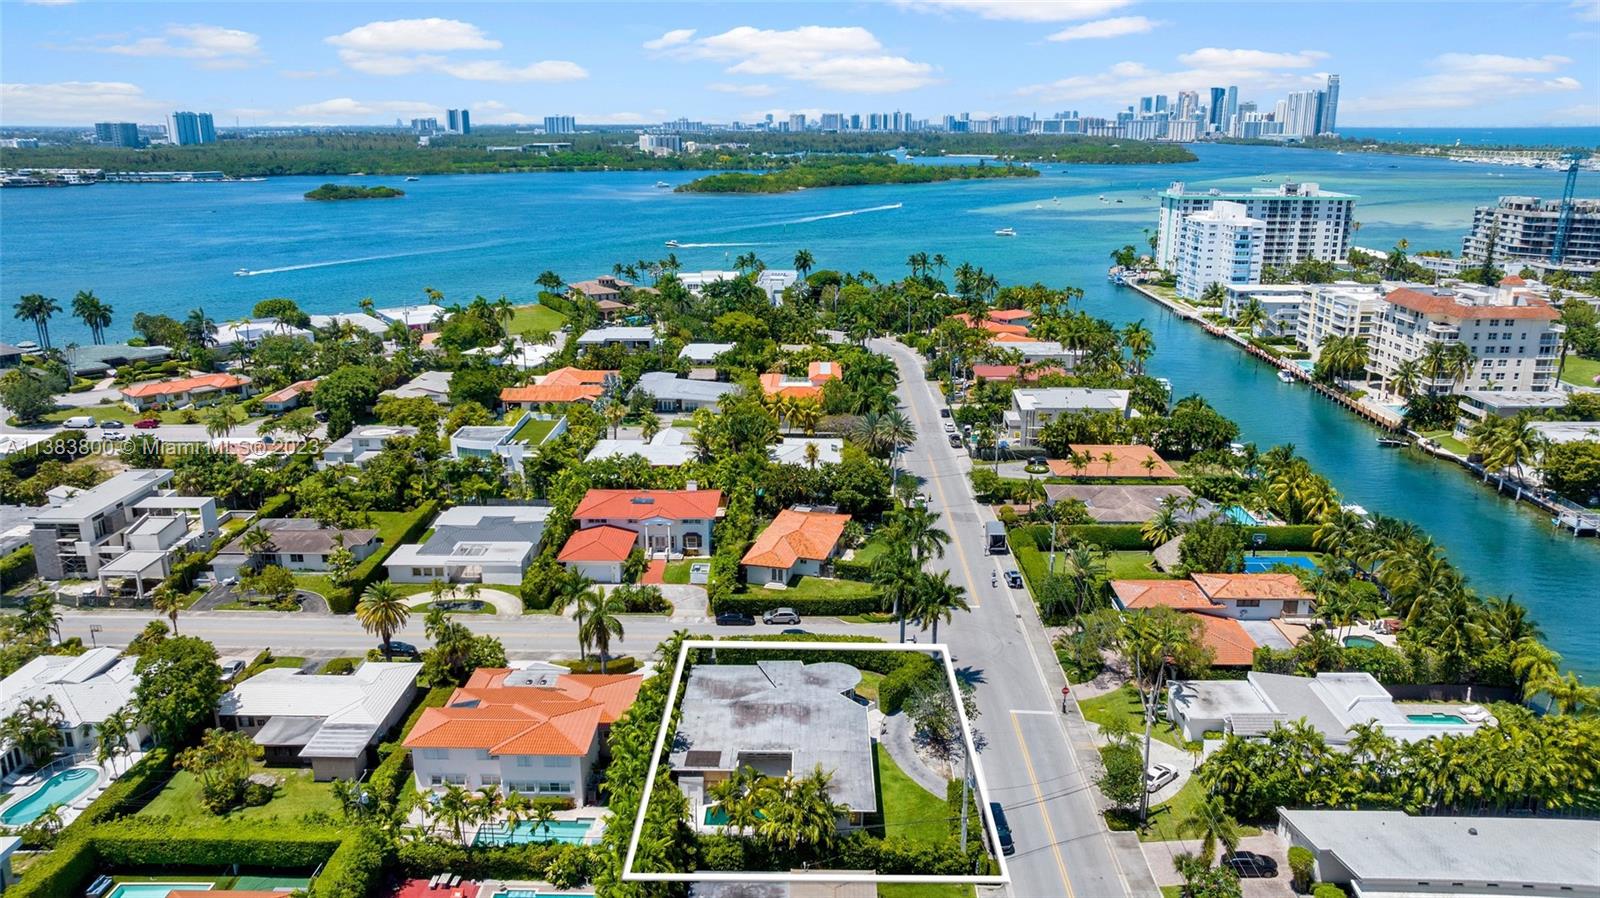 Renovate your dream home on an oversized 10,625 SF lot in one of the most desirable neighborhoods in South Florida: Bay Harbor Islands. 
This 3,511 SF house has 4 bedrooms, 4 bathrooms, a pool, and a basketball court. Rough electrical, and plumbing have been completed. All hurricane impact windows needed for the renovation are included.